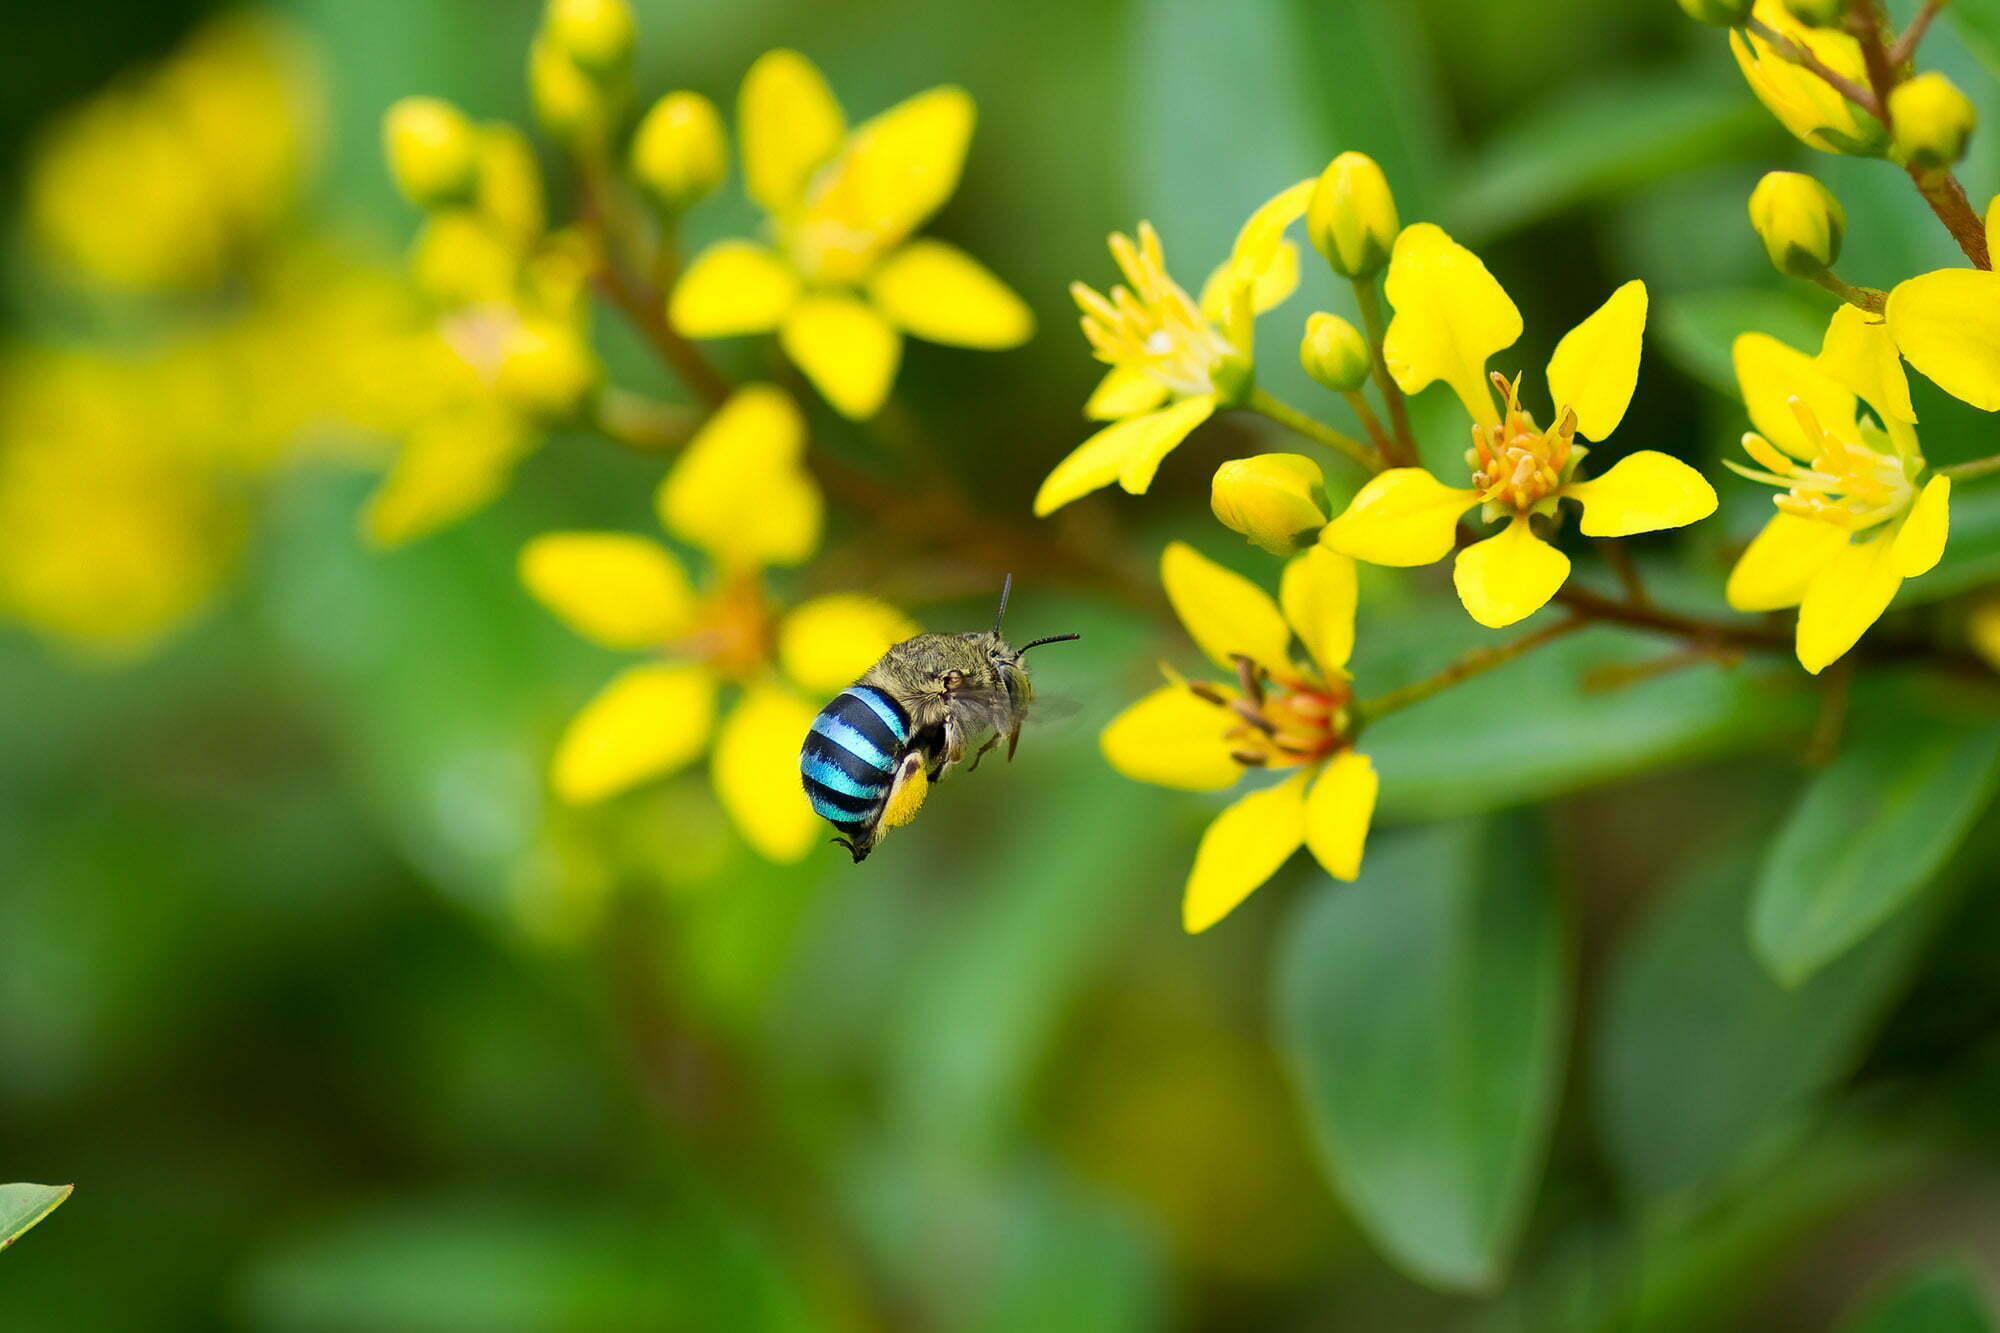 Blue Banded bee approaching yellow flowers